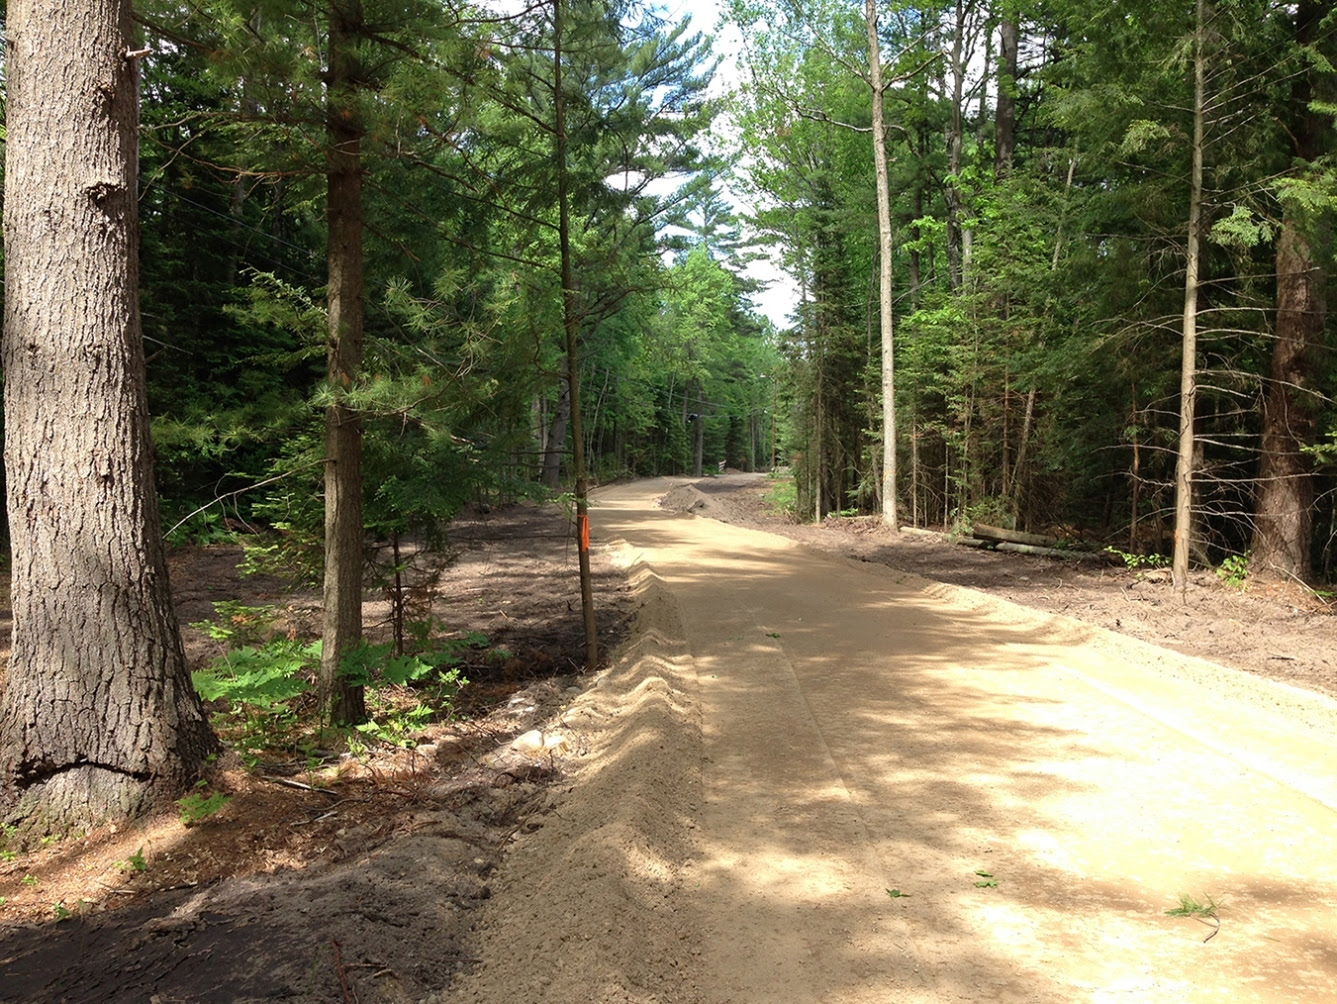 In 2017, a 2-mile segment of Michigan's Iron Belle Trail at North Higgins Lake was completed.